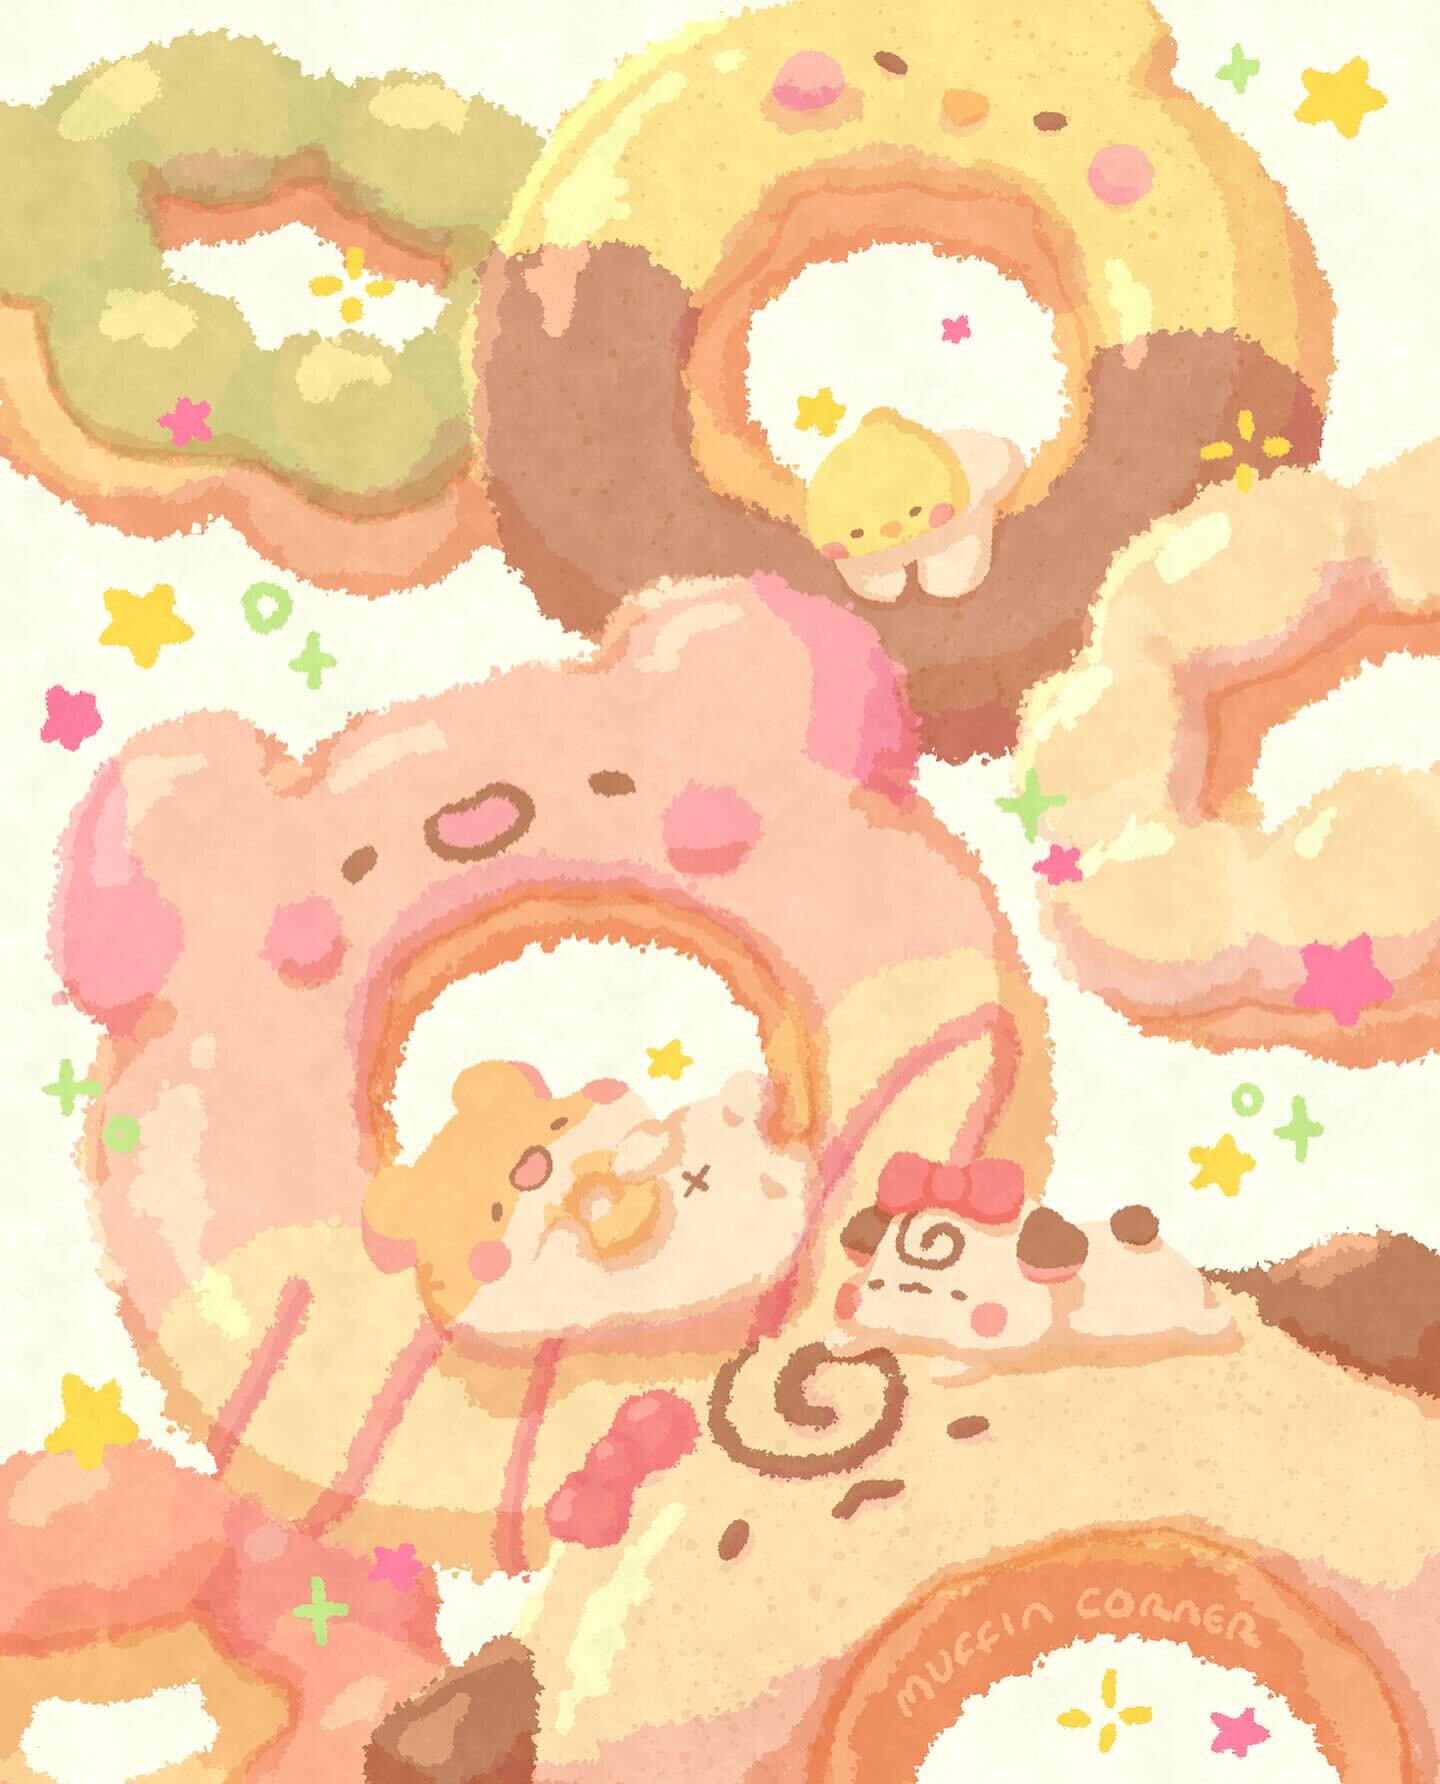 [Free Wallpaper] Muffinmaru and friends are taking a donut break!🍩✨ What&rsquo;s your favorite kind of donut? 

This illustration is available as a free wallpaper~ Please go to our bi0 -&gt; App Icons/Wallpapers if you would like a copy🧡
 
 
 

#do